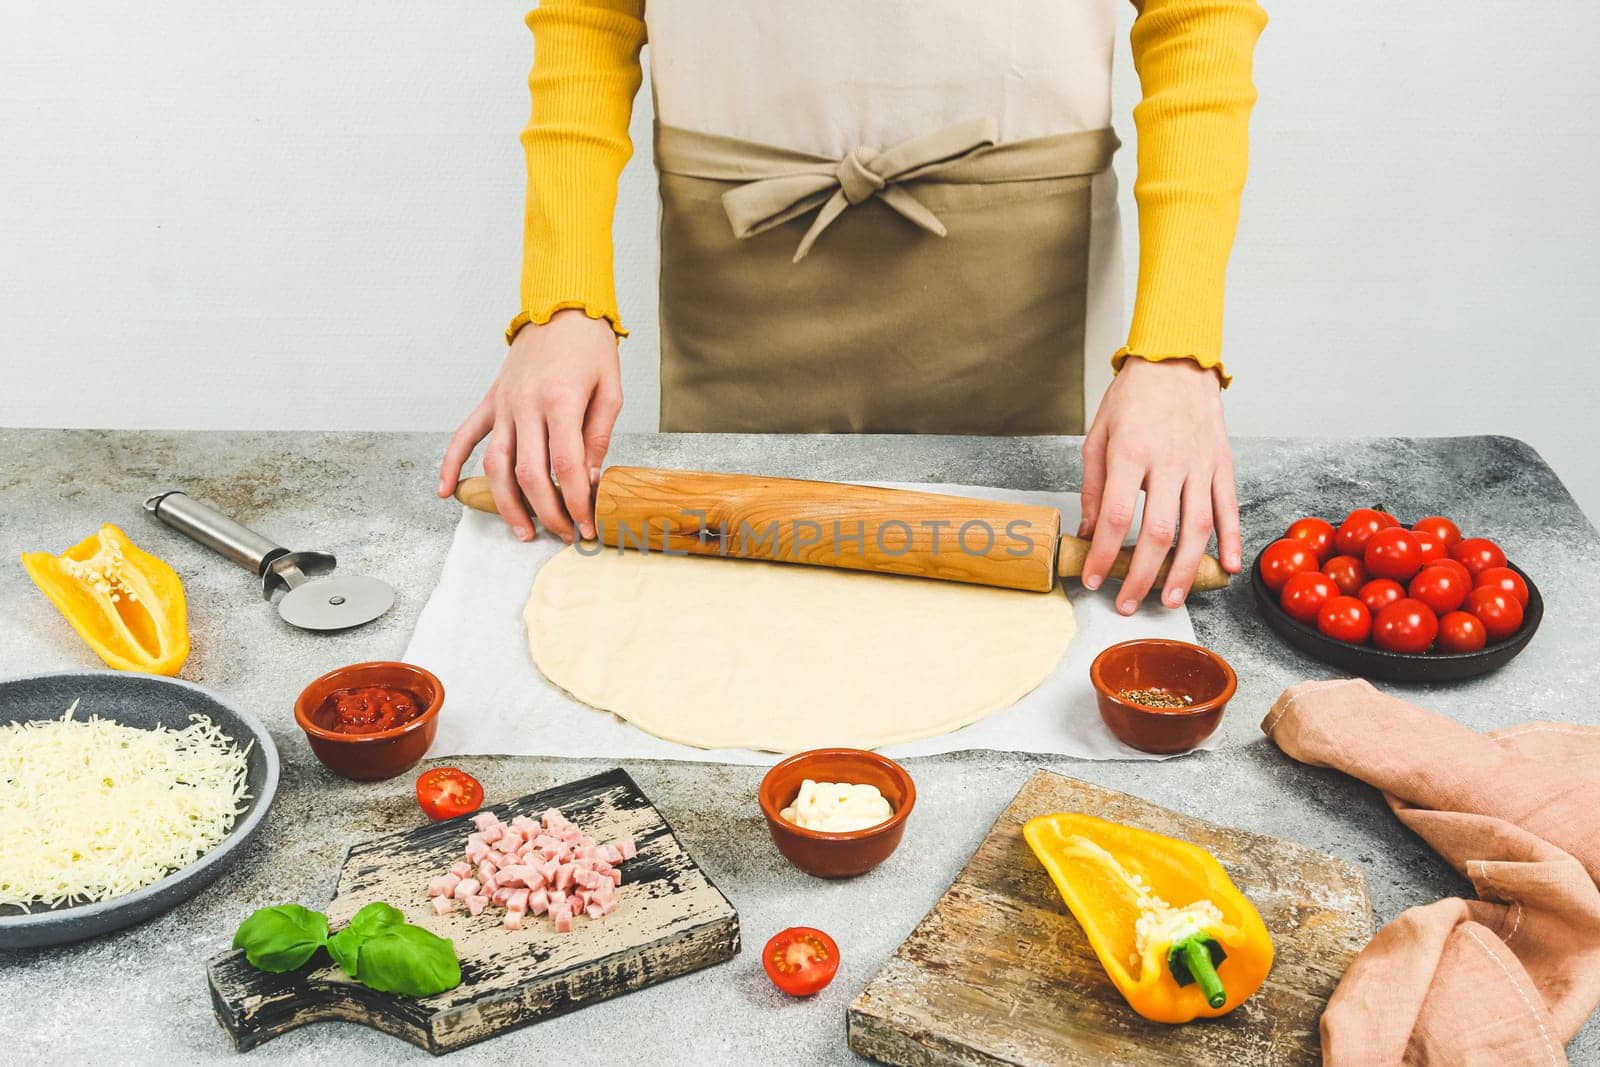 Hands of a caucasian teenager in an apron roll out pizza dough with a rolling pin on a table with ingredients, a knife and cutting boards, side view close-up.